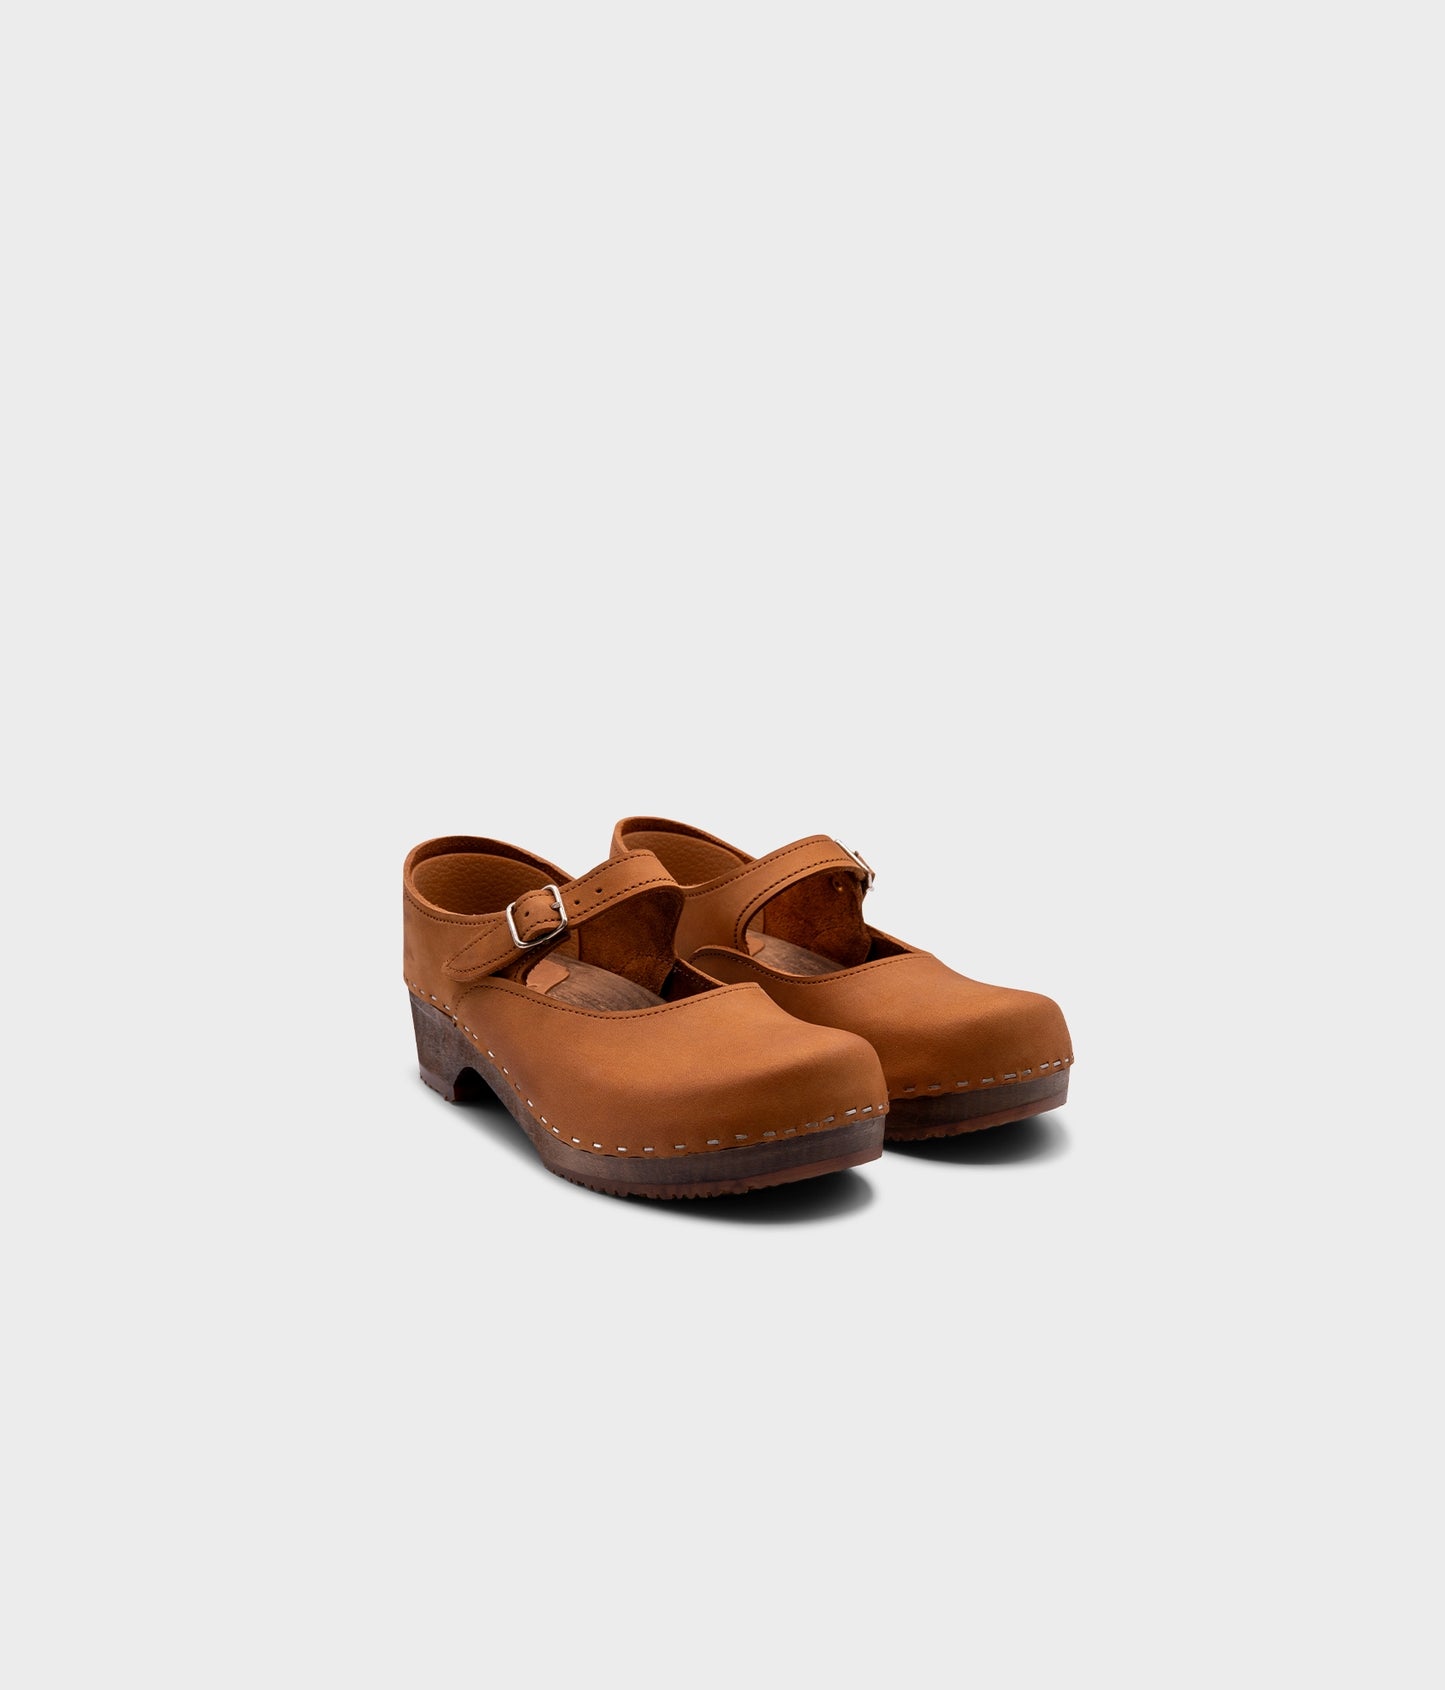 Mary Jane wooden clogs in light brown nubuck leather stapled on a dark wooden base